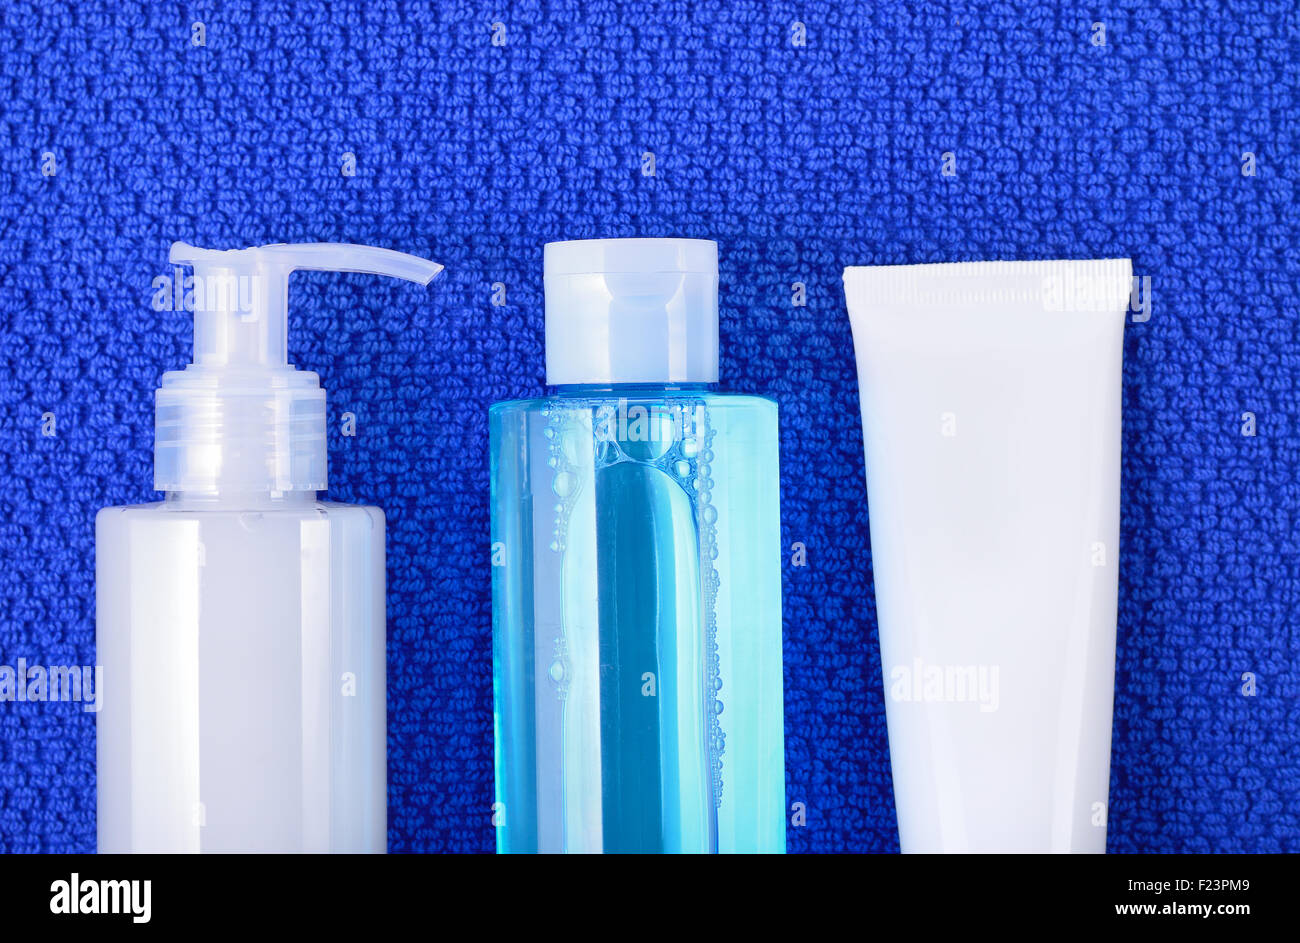 Daily basic care cosmetics - face wash cleansing gel, smoothing toner and cream on navy blue towel. Top view. Stock Photo